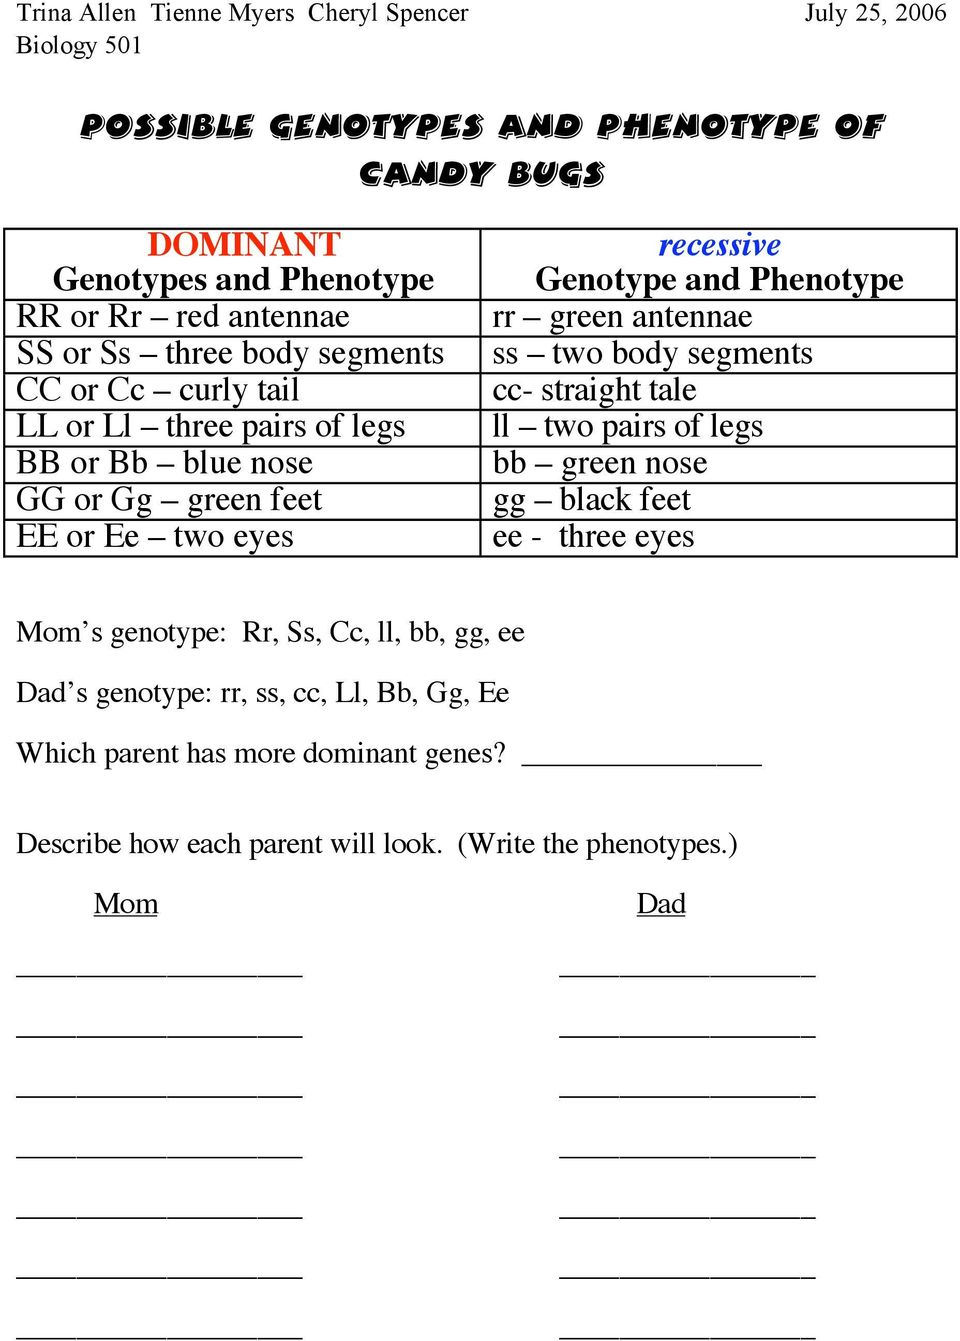 25+ Awesome Genotype And Phenotype Worksheet Answers With Regard To Genotypes And Phenotypes Worksheet